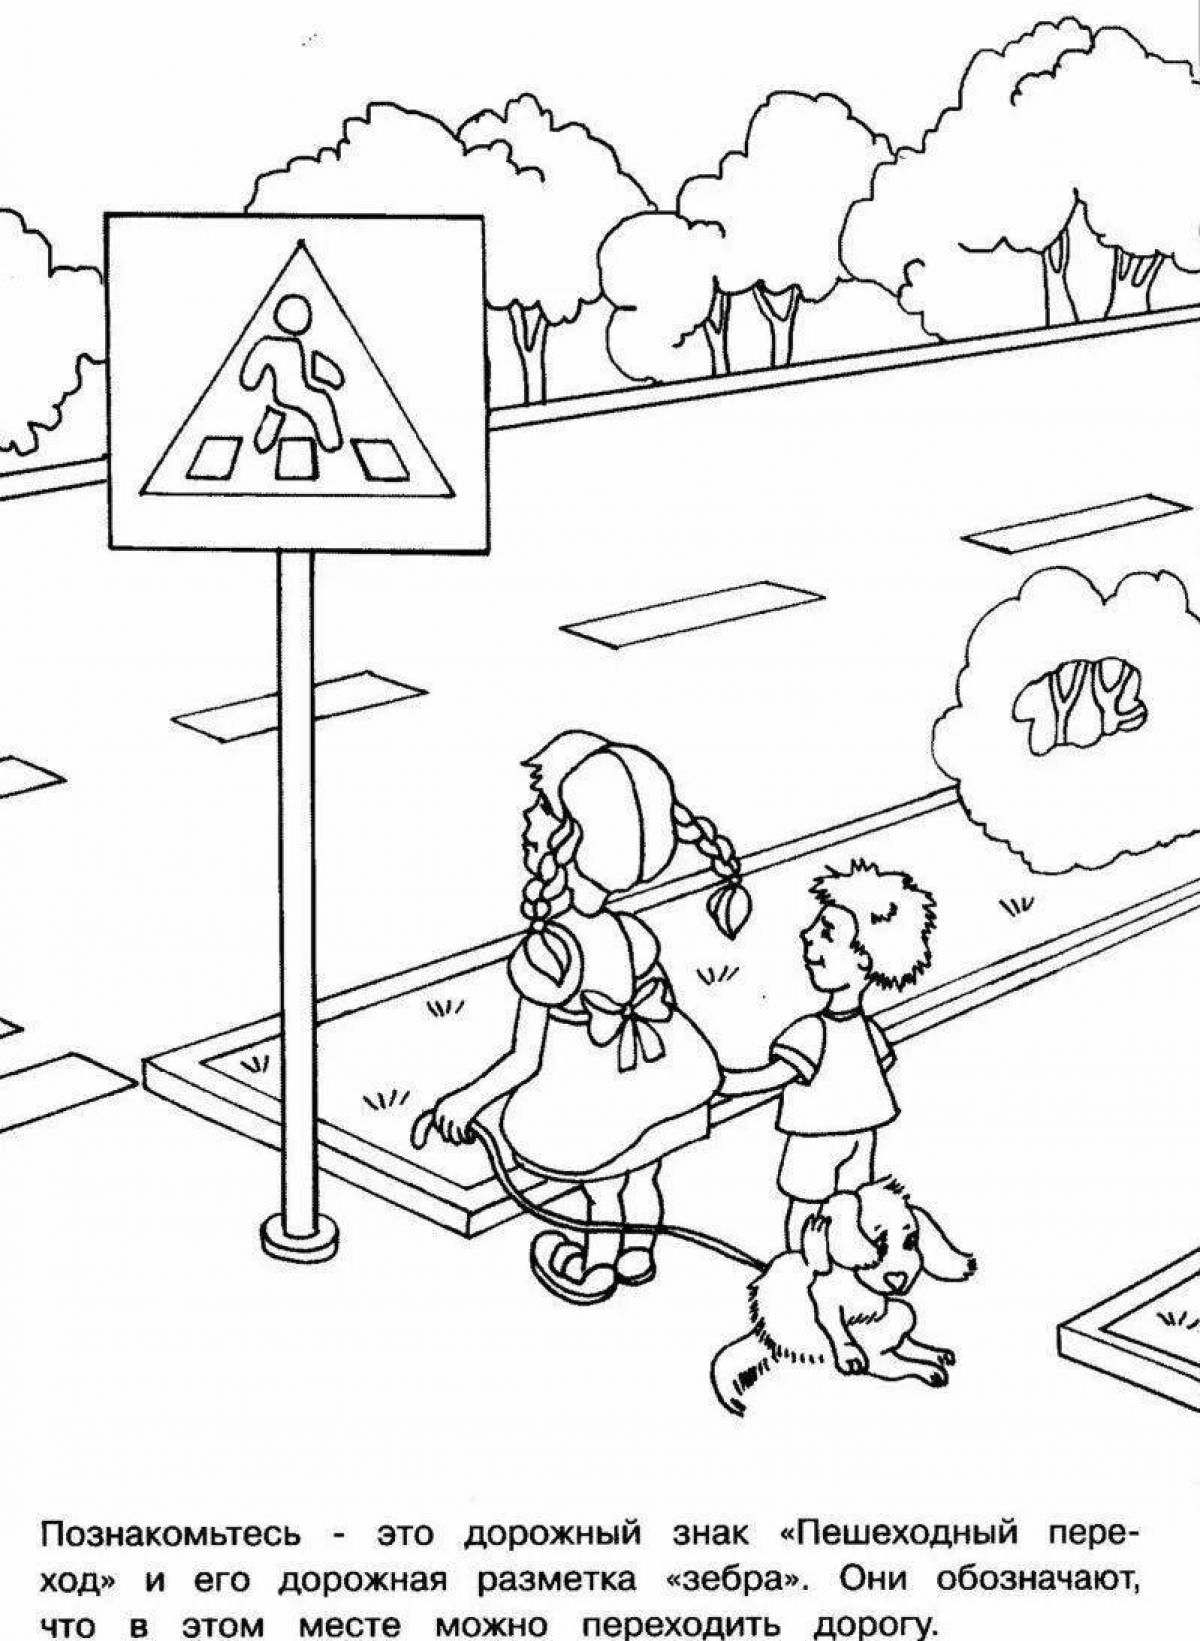 Radiant way home coloring page